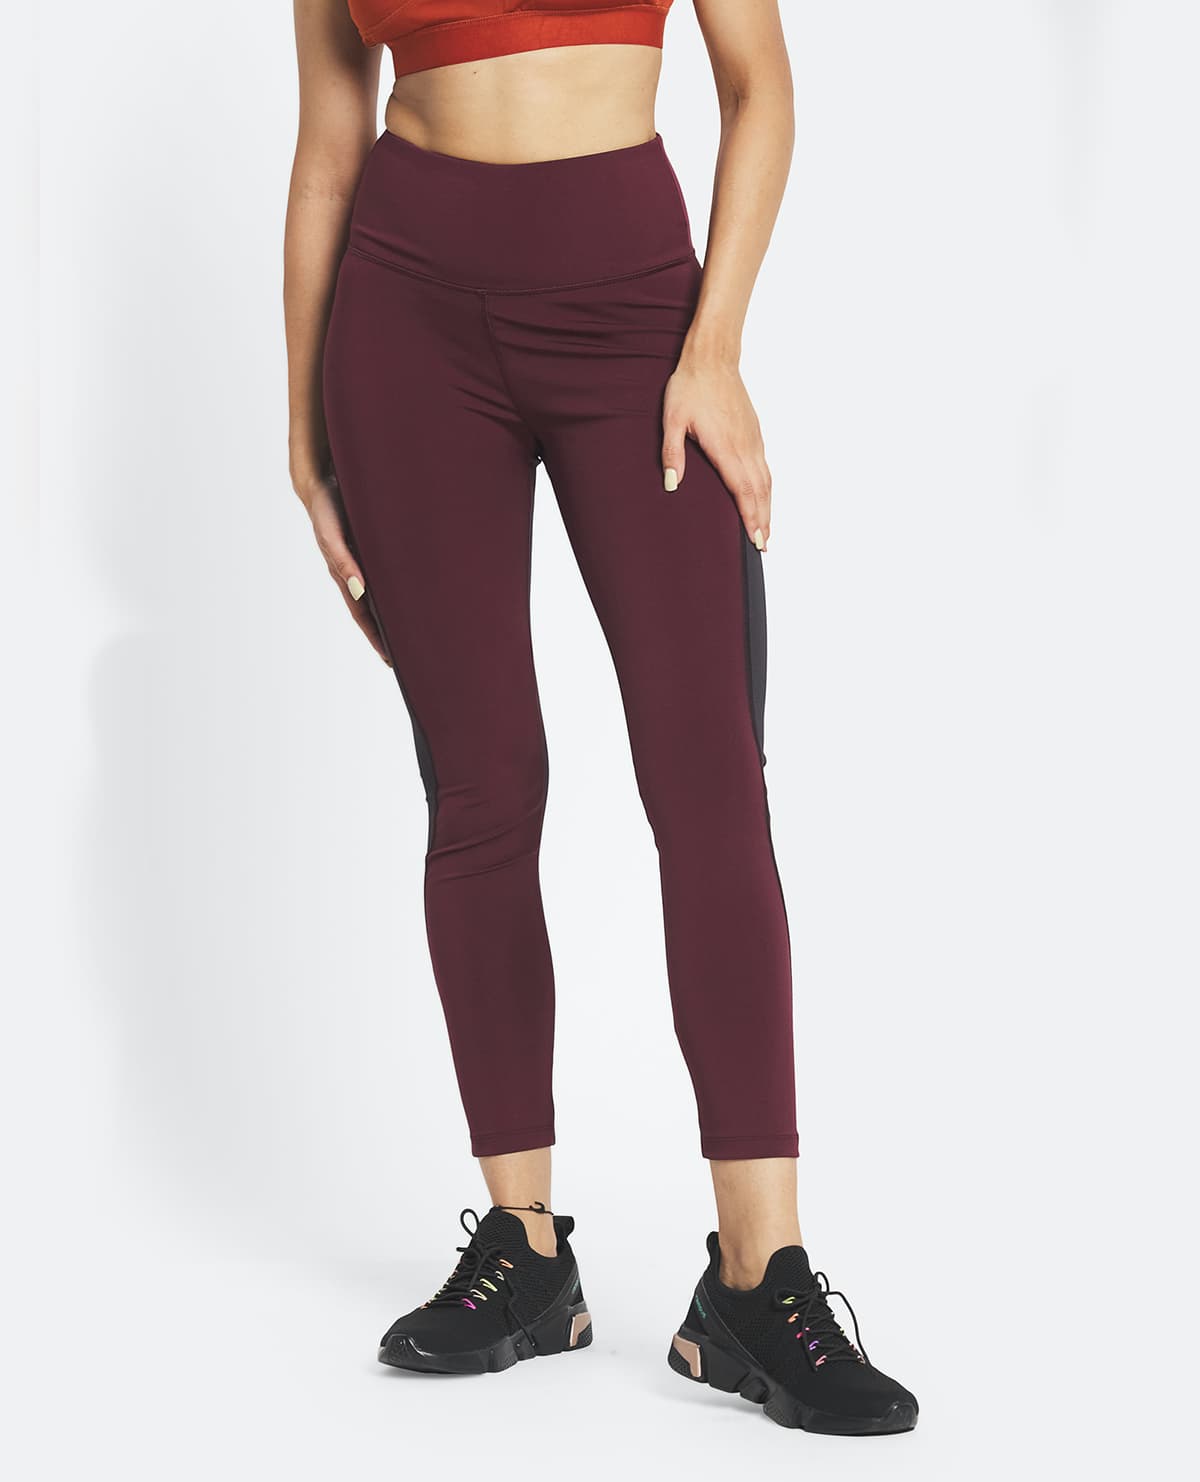 High Waisted Dual Coloured Leggings in Second SKN Fabric – Kica Active